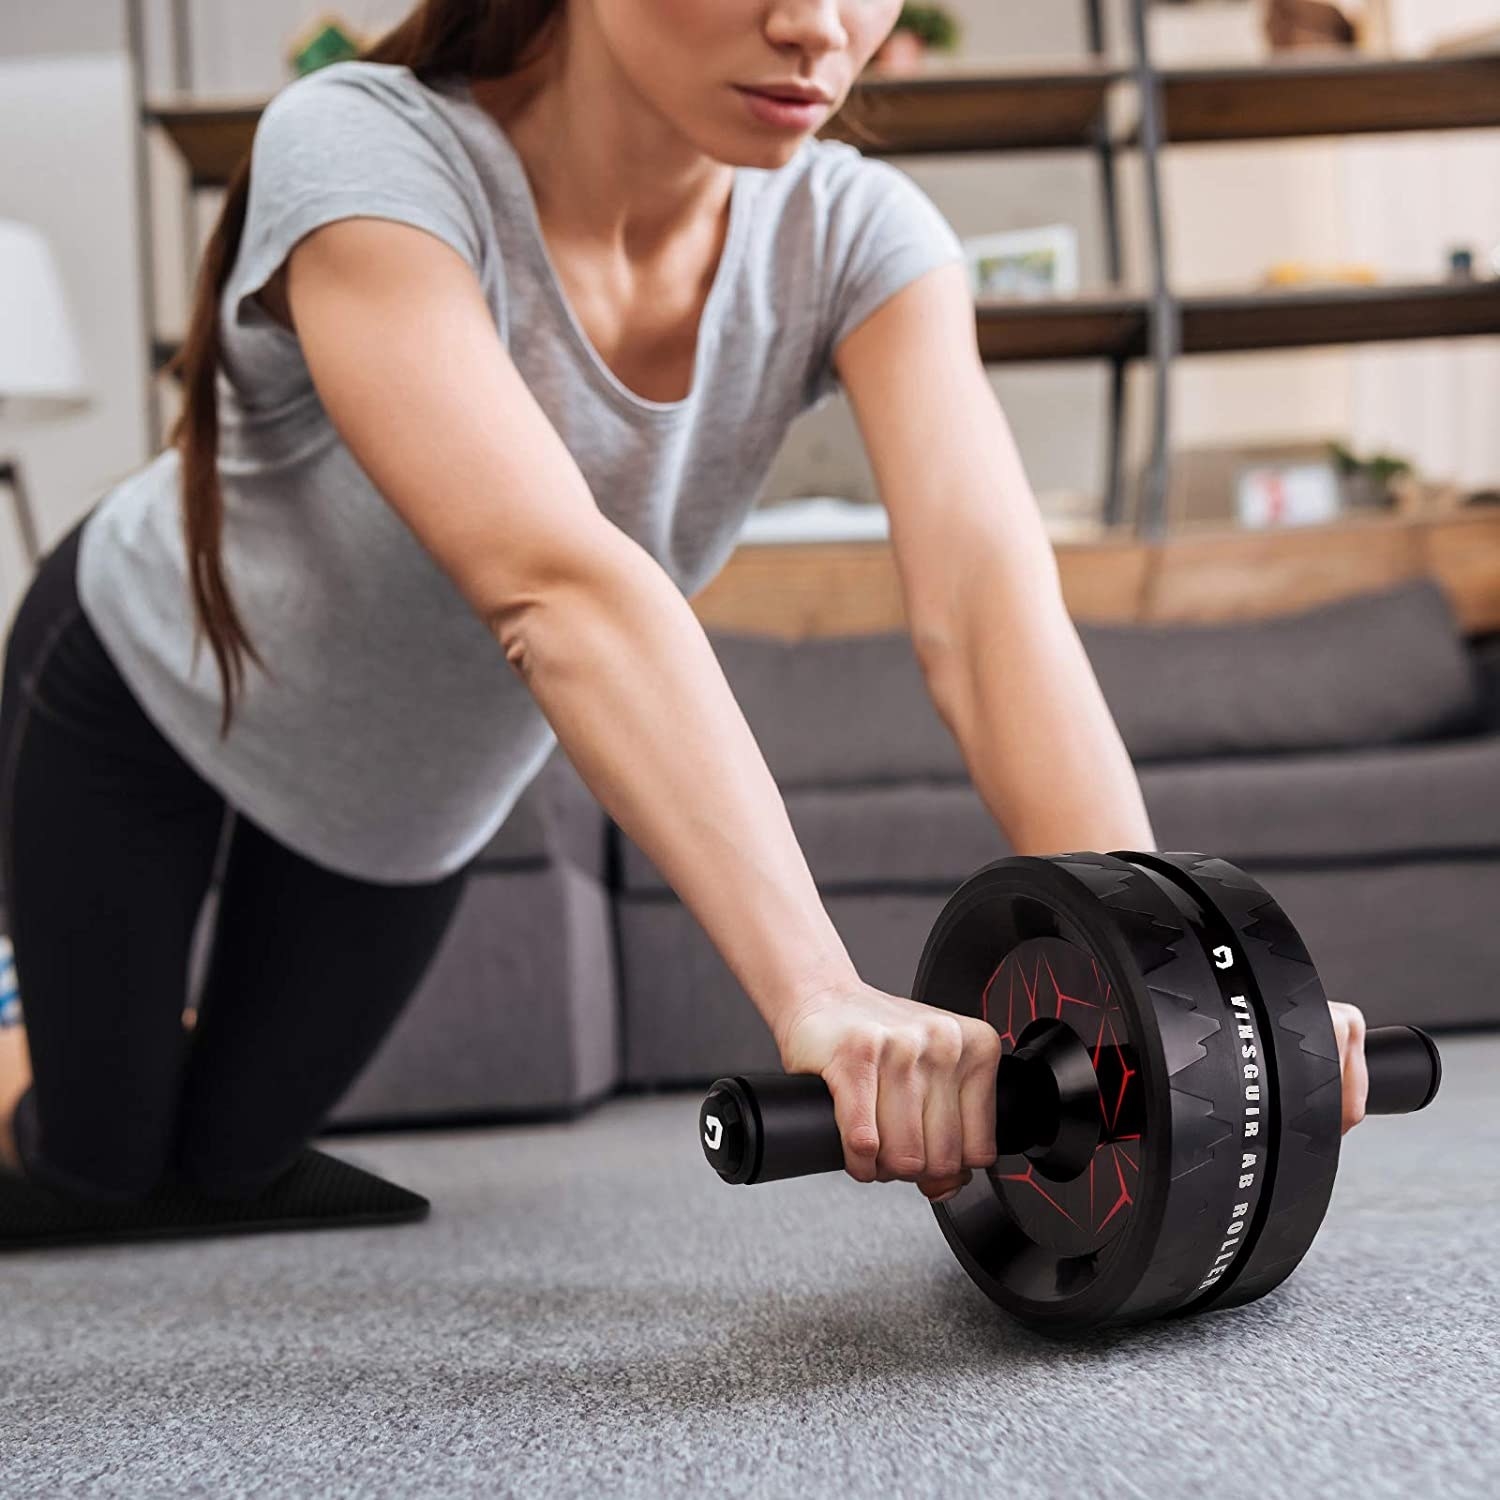 Nine Pieces of Underused Workout Equipment That Can Work for You